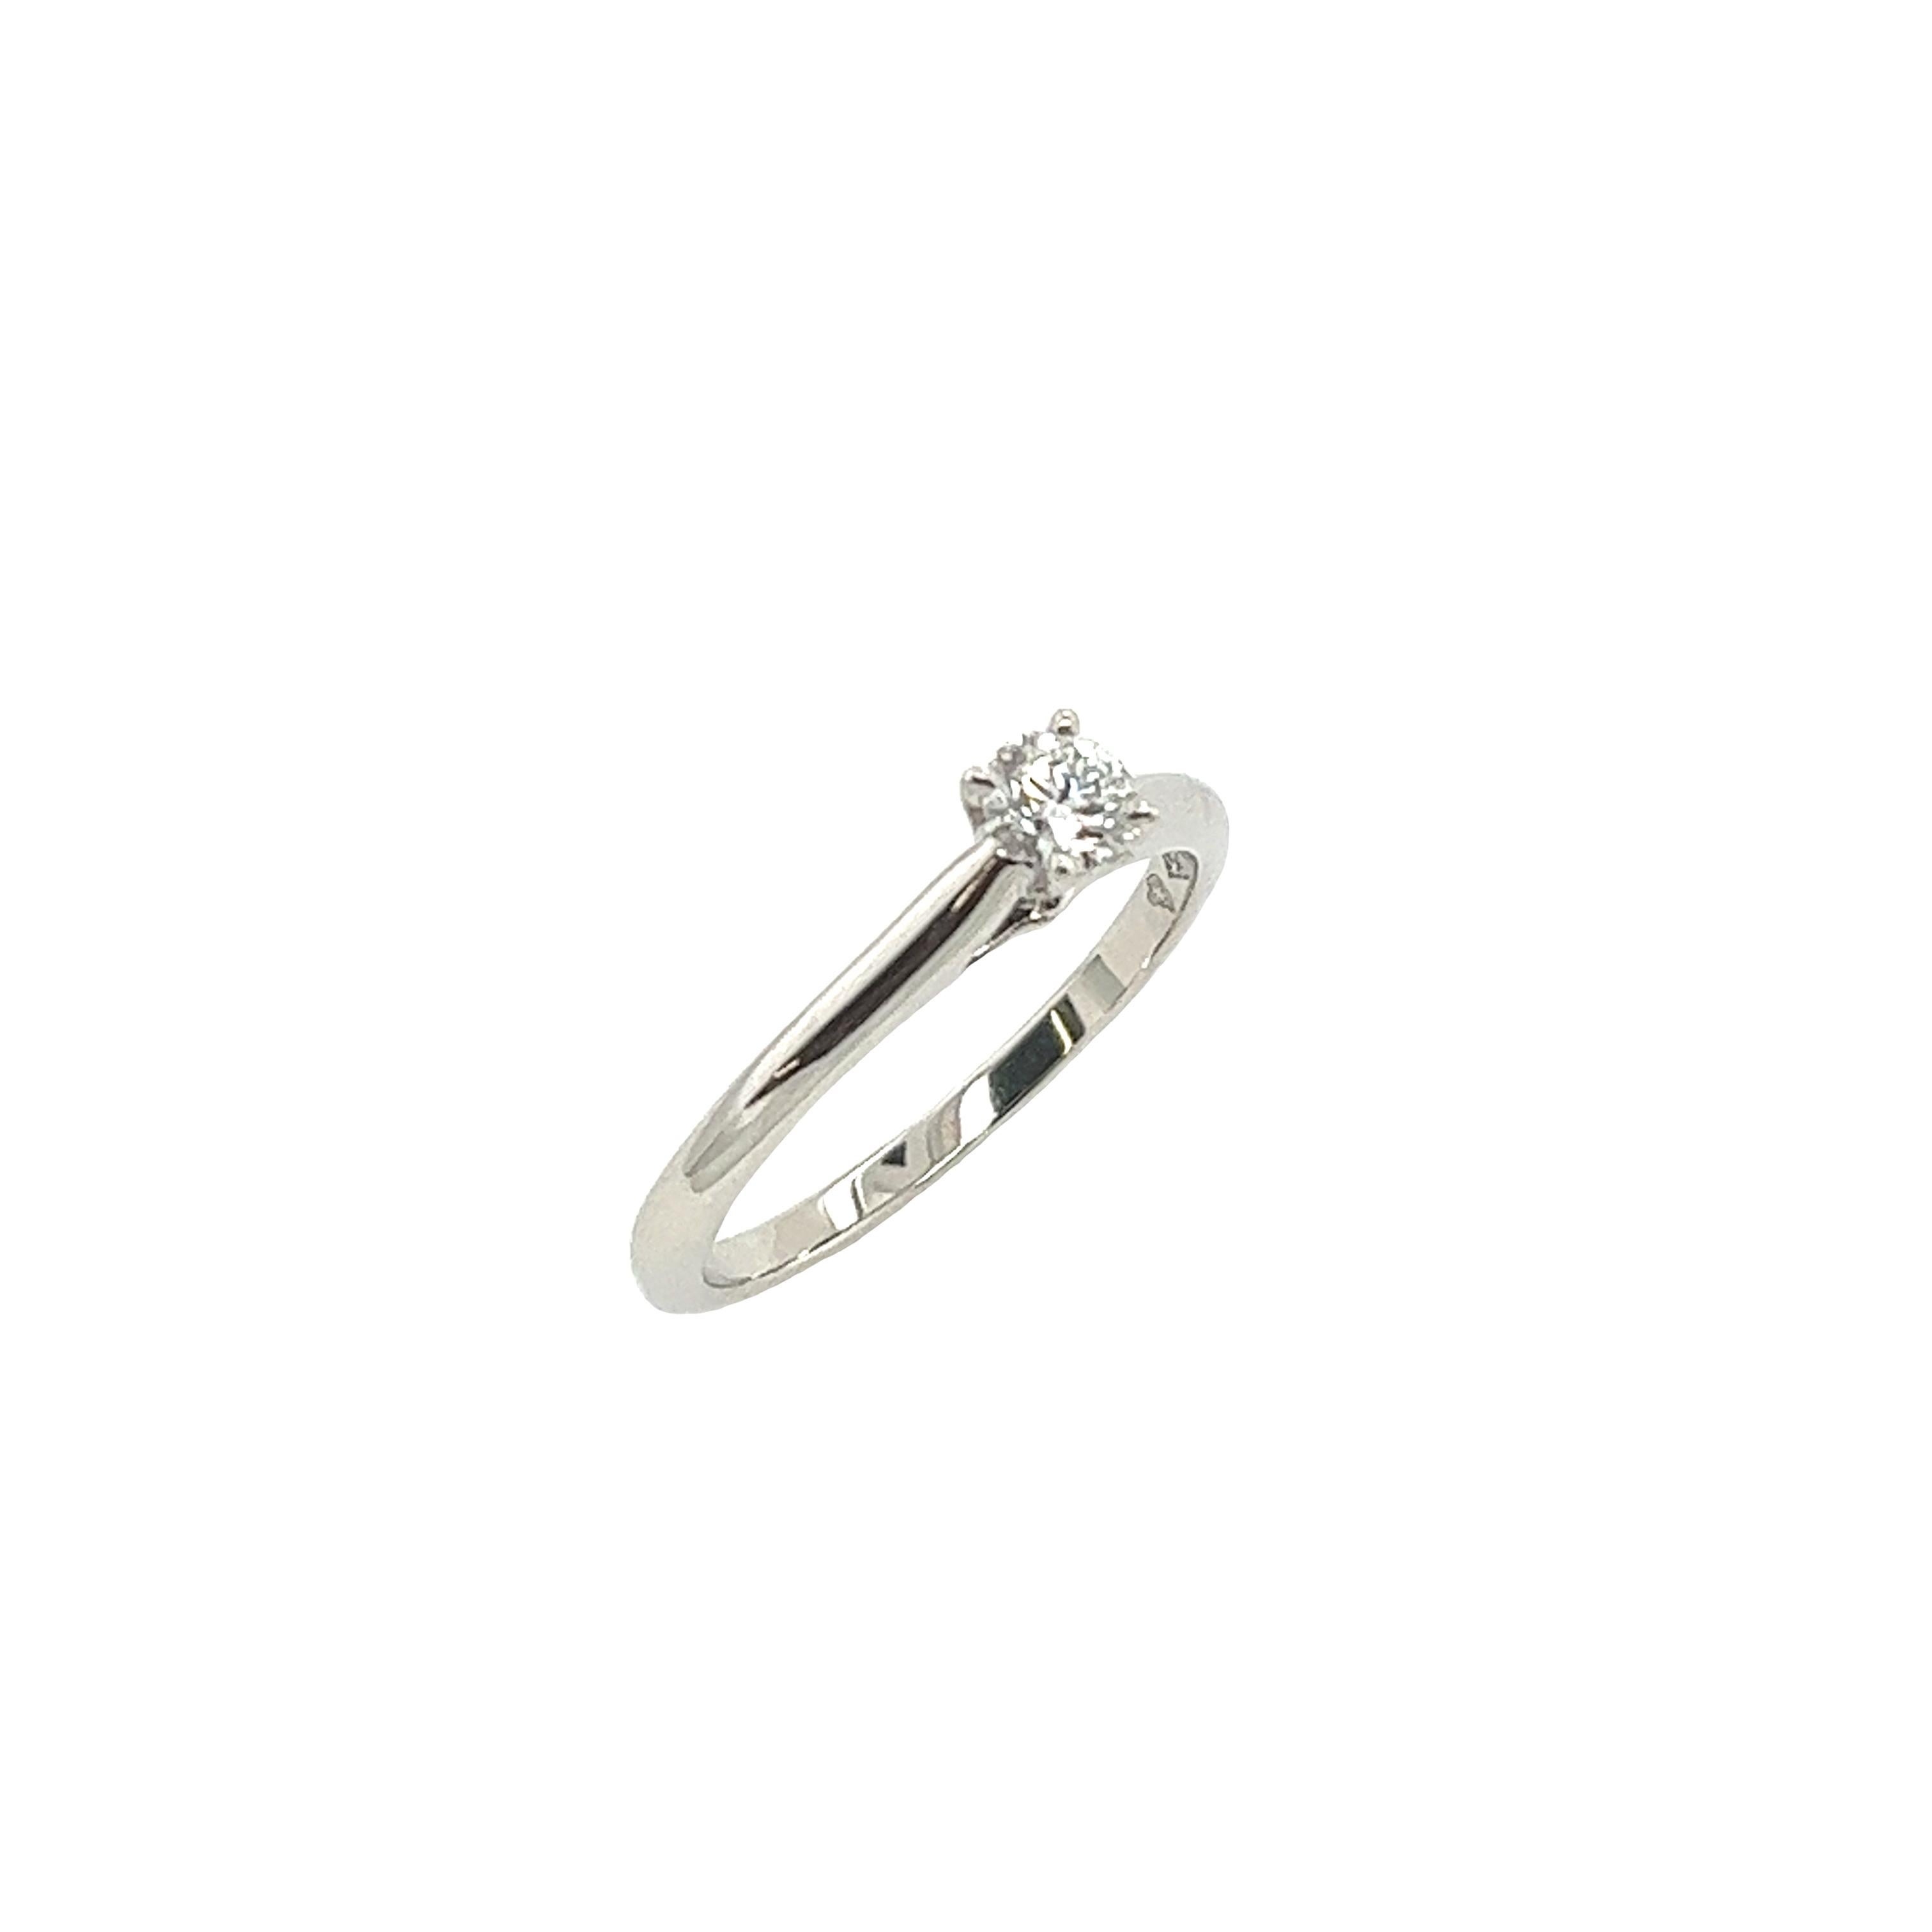 Experience the epitome of luxury with the Cartier Platinum Solitaire Diamond Ring. Featuring a GIA-certified 0.25-carat F/VVS2 round diamond, this exquisite piece embodies sophistication and timeless elegance. Set in platinum, its classic design